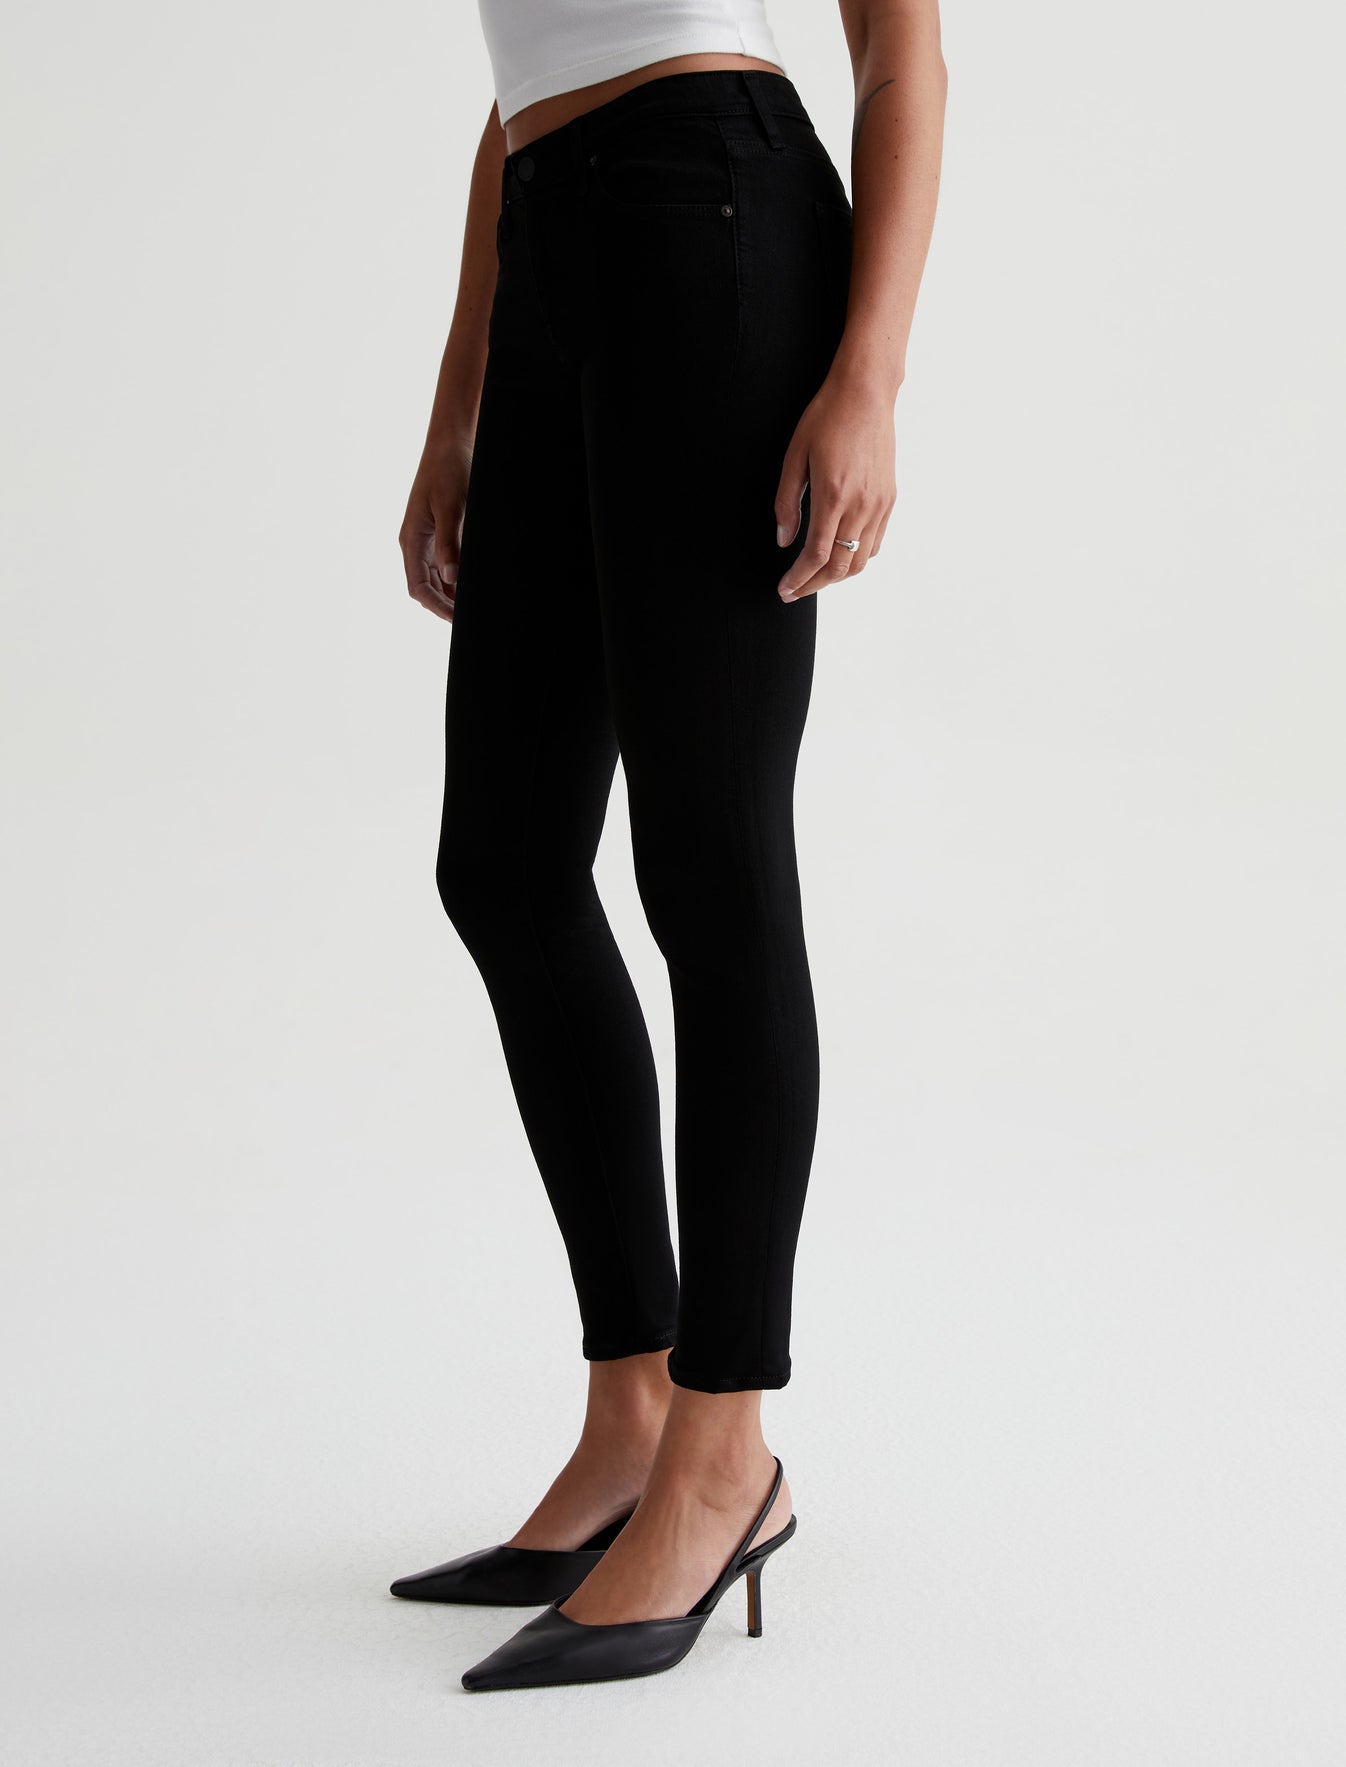 Womens Legging Ankle Super Black at AG Jeans Official Store